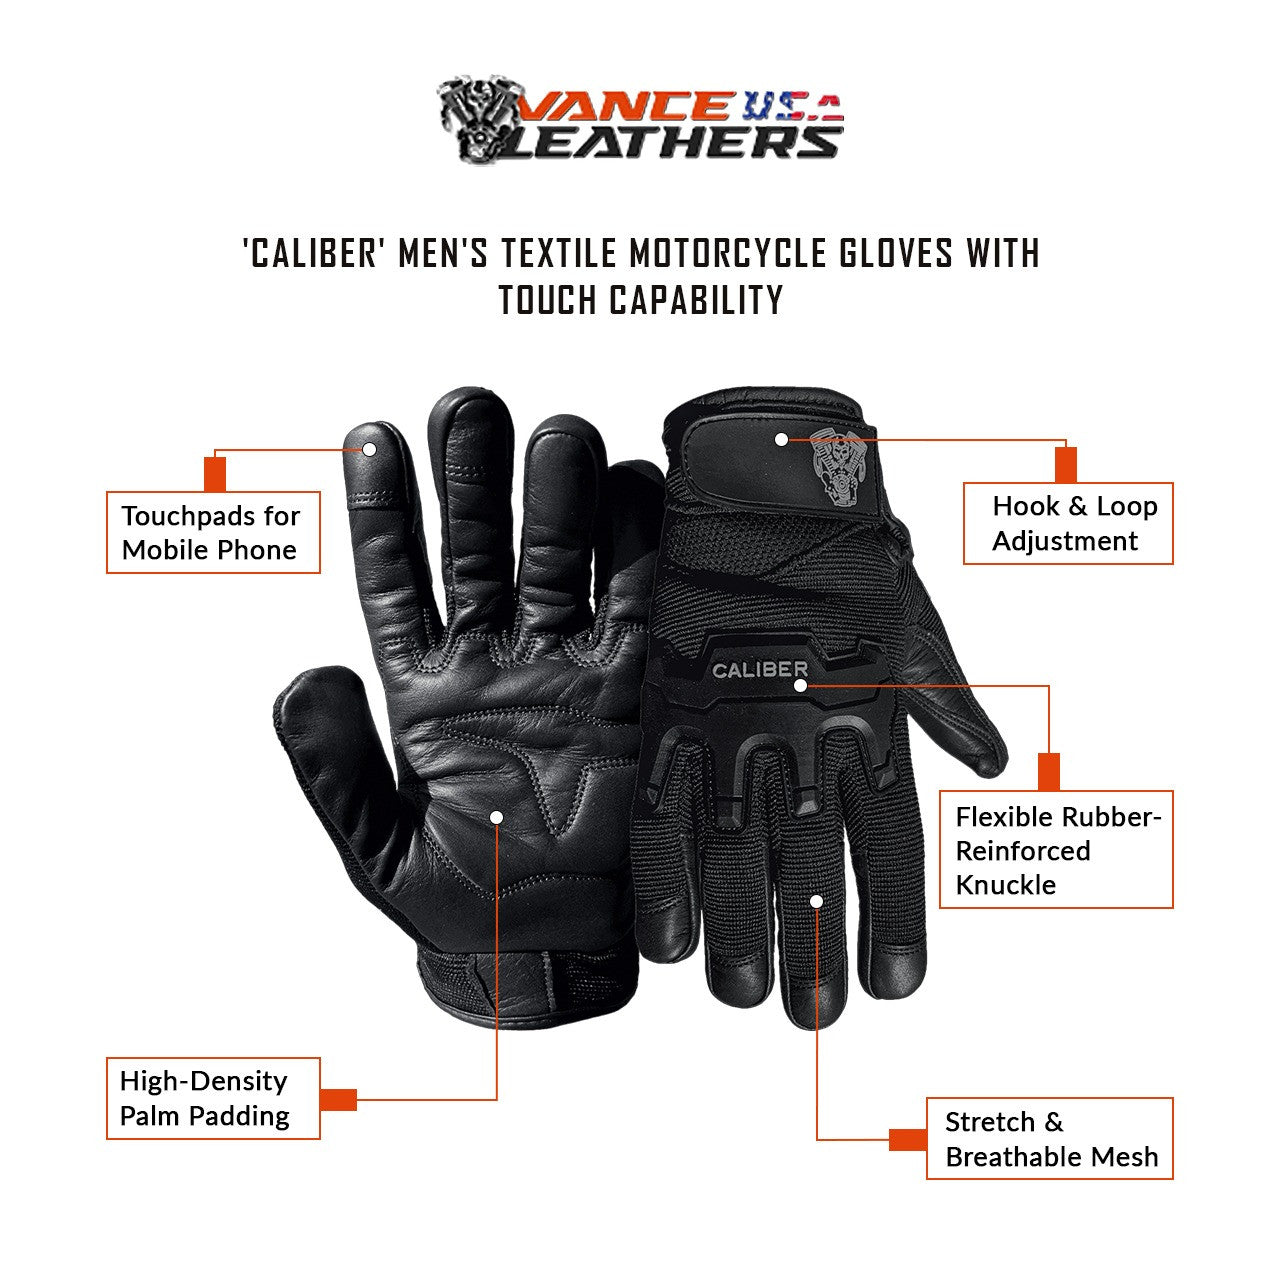 Caliber-Mens-Textile-Motorcycle-Gloves-with-Touch-Capability-infographic